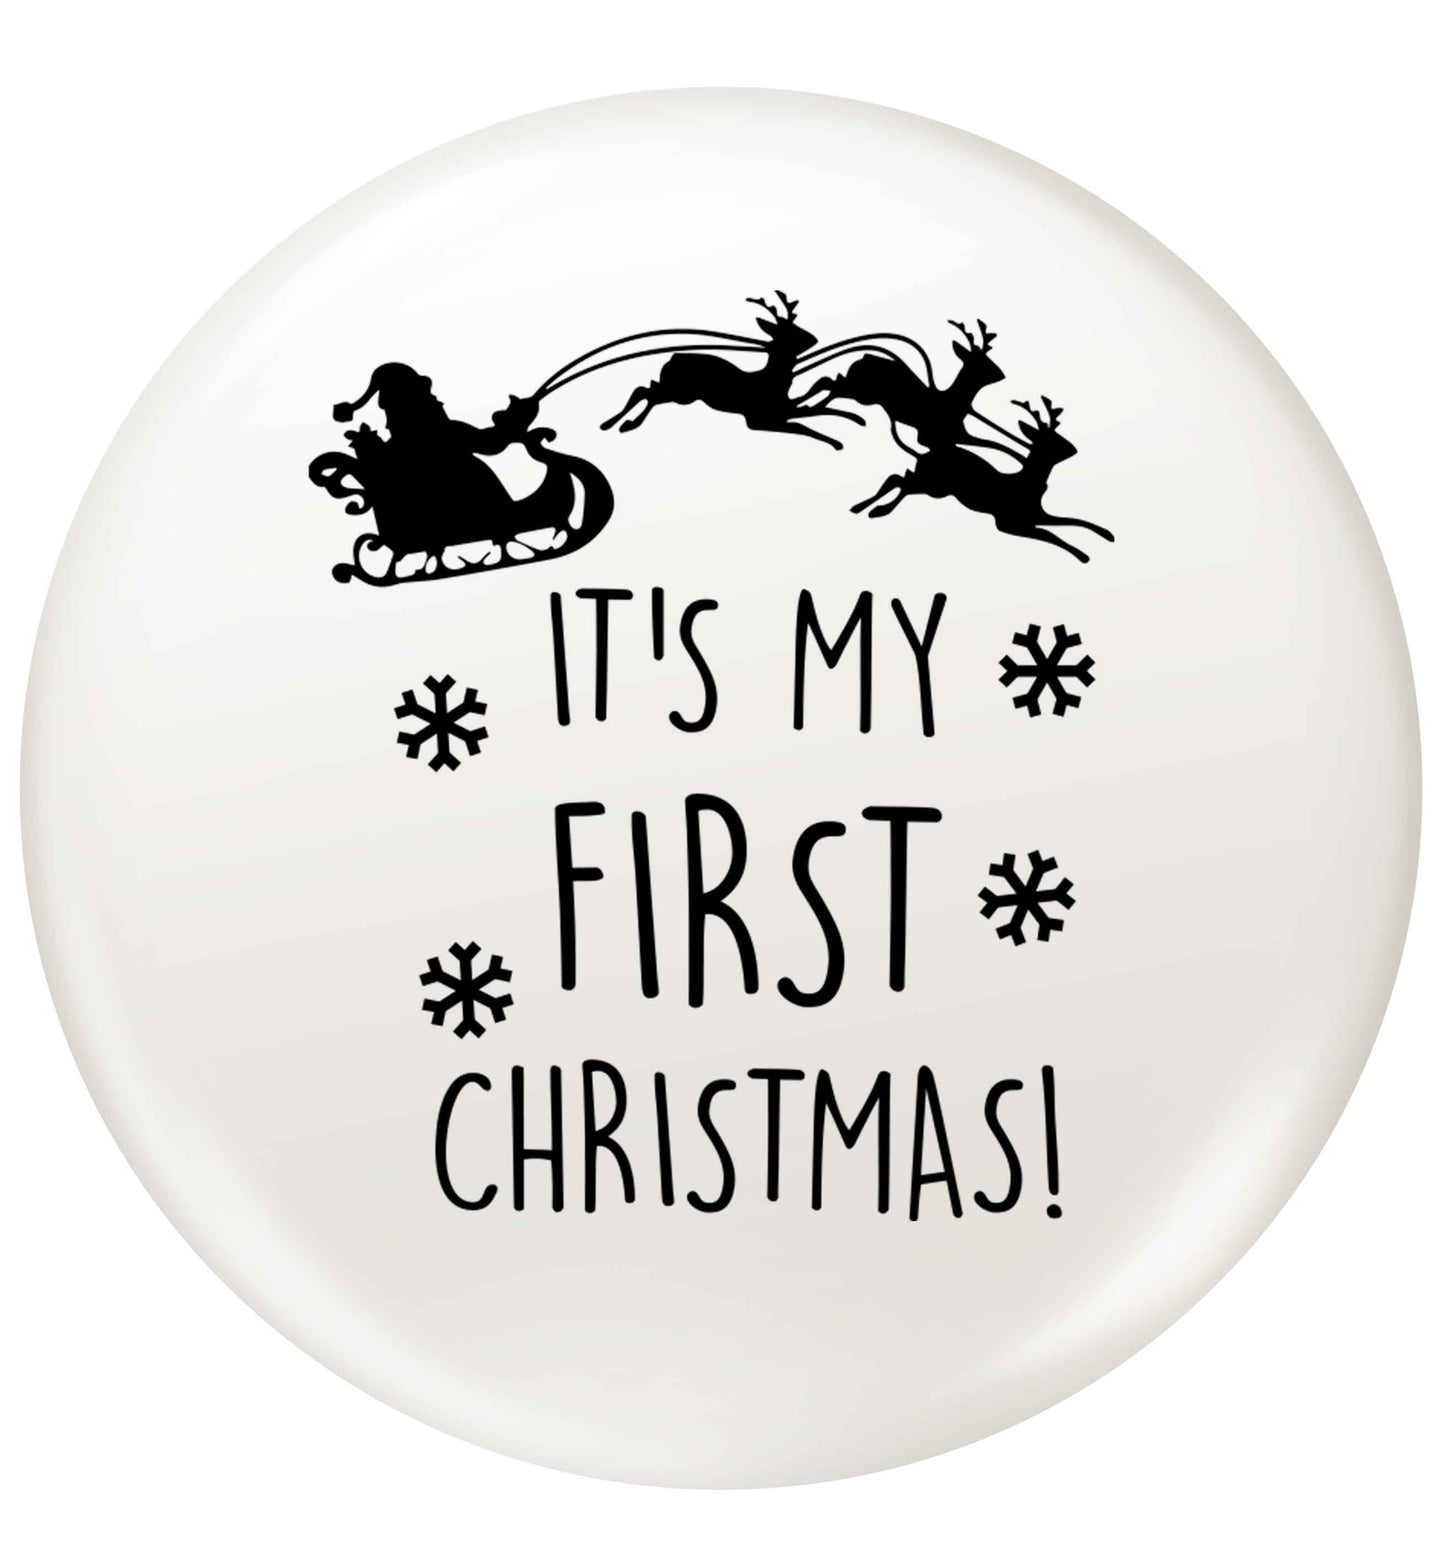 It's my first Christmas - Santa sleigh text small 25mm Pin badge